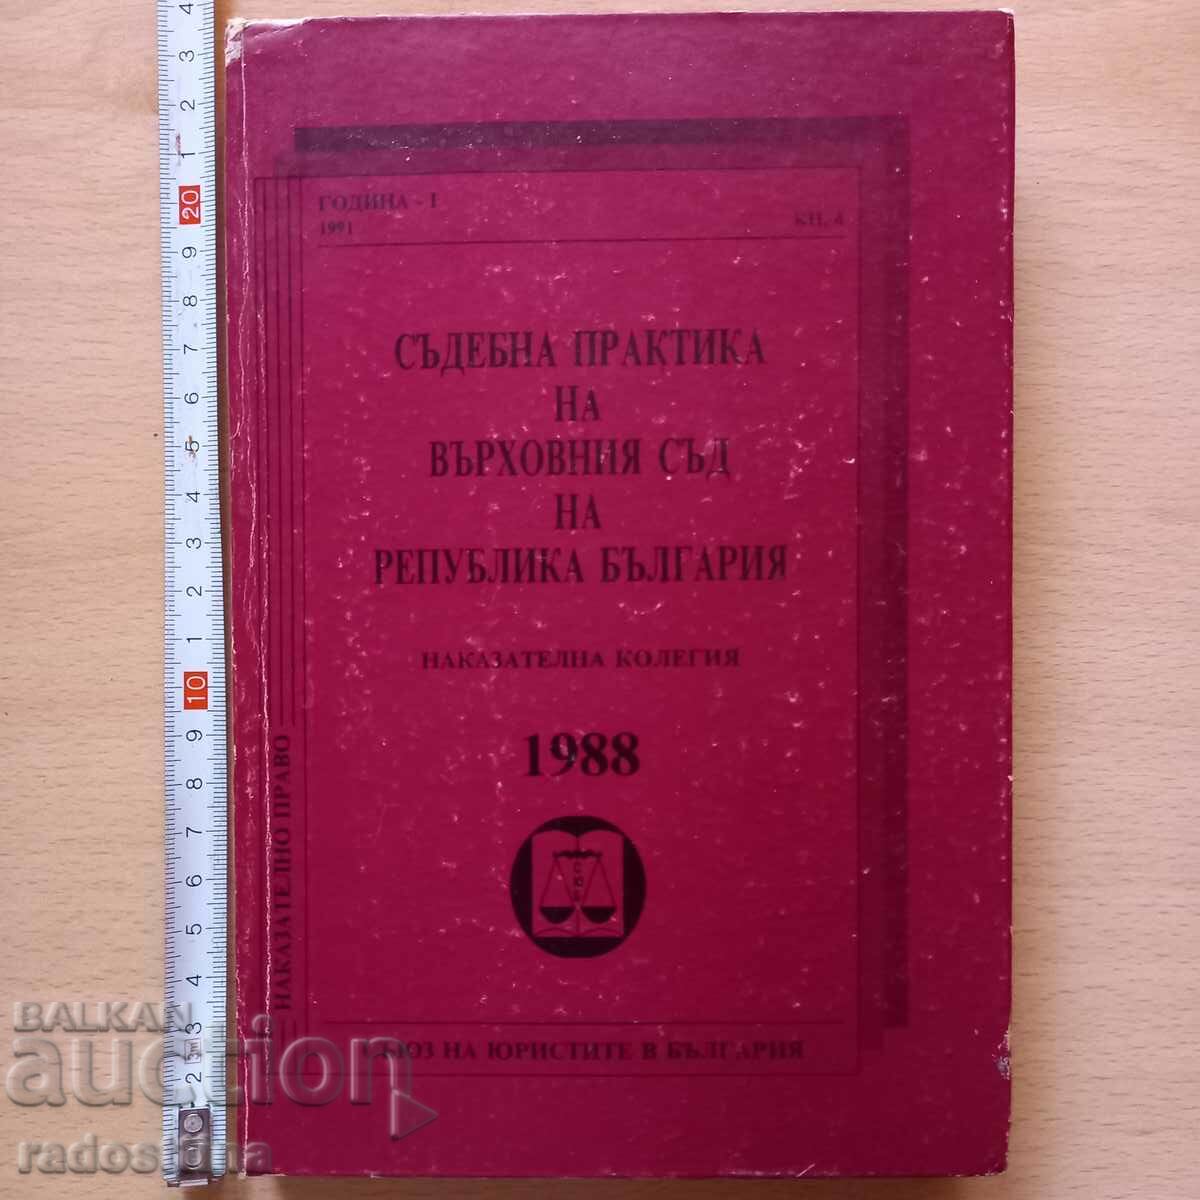 Case law of the Supreme Court of the Republic of Bulgaria 1988